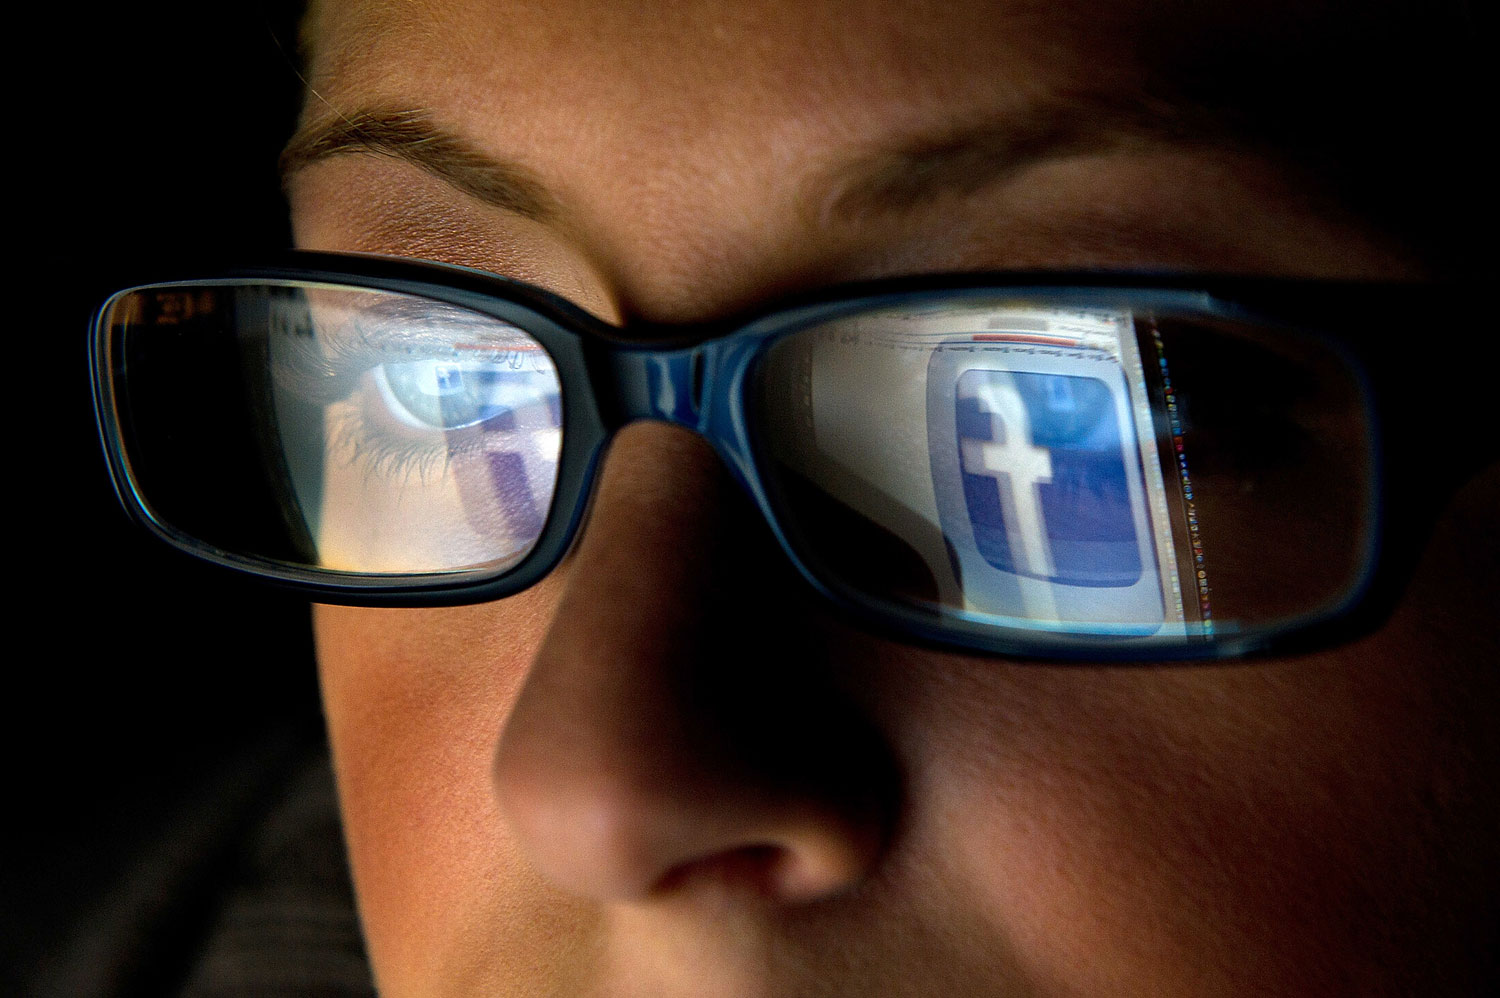 The Facebook Inc. logo is reflected in the eyeglasses of a user in San Francisco, Dec. 7, 2011. (David Paul Morris—Bloomberg/Getty Images)